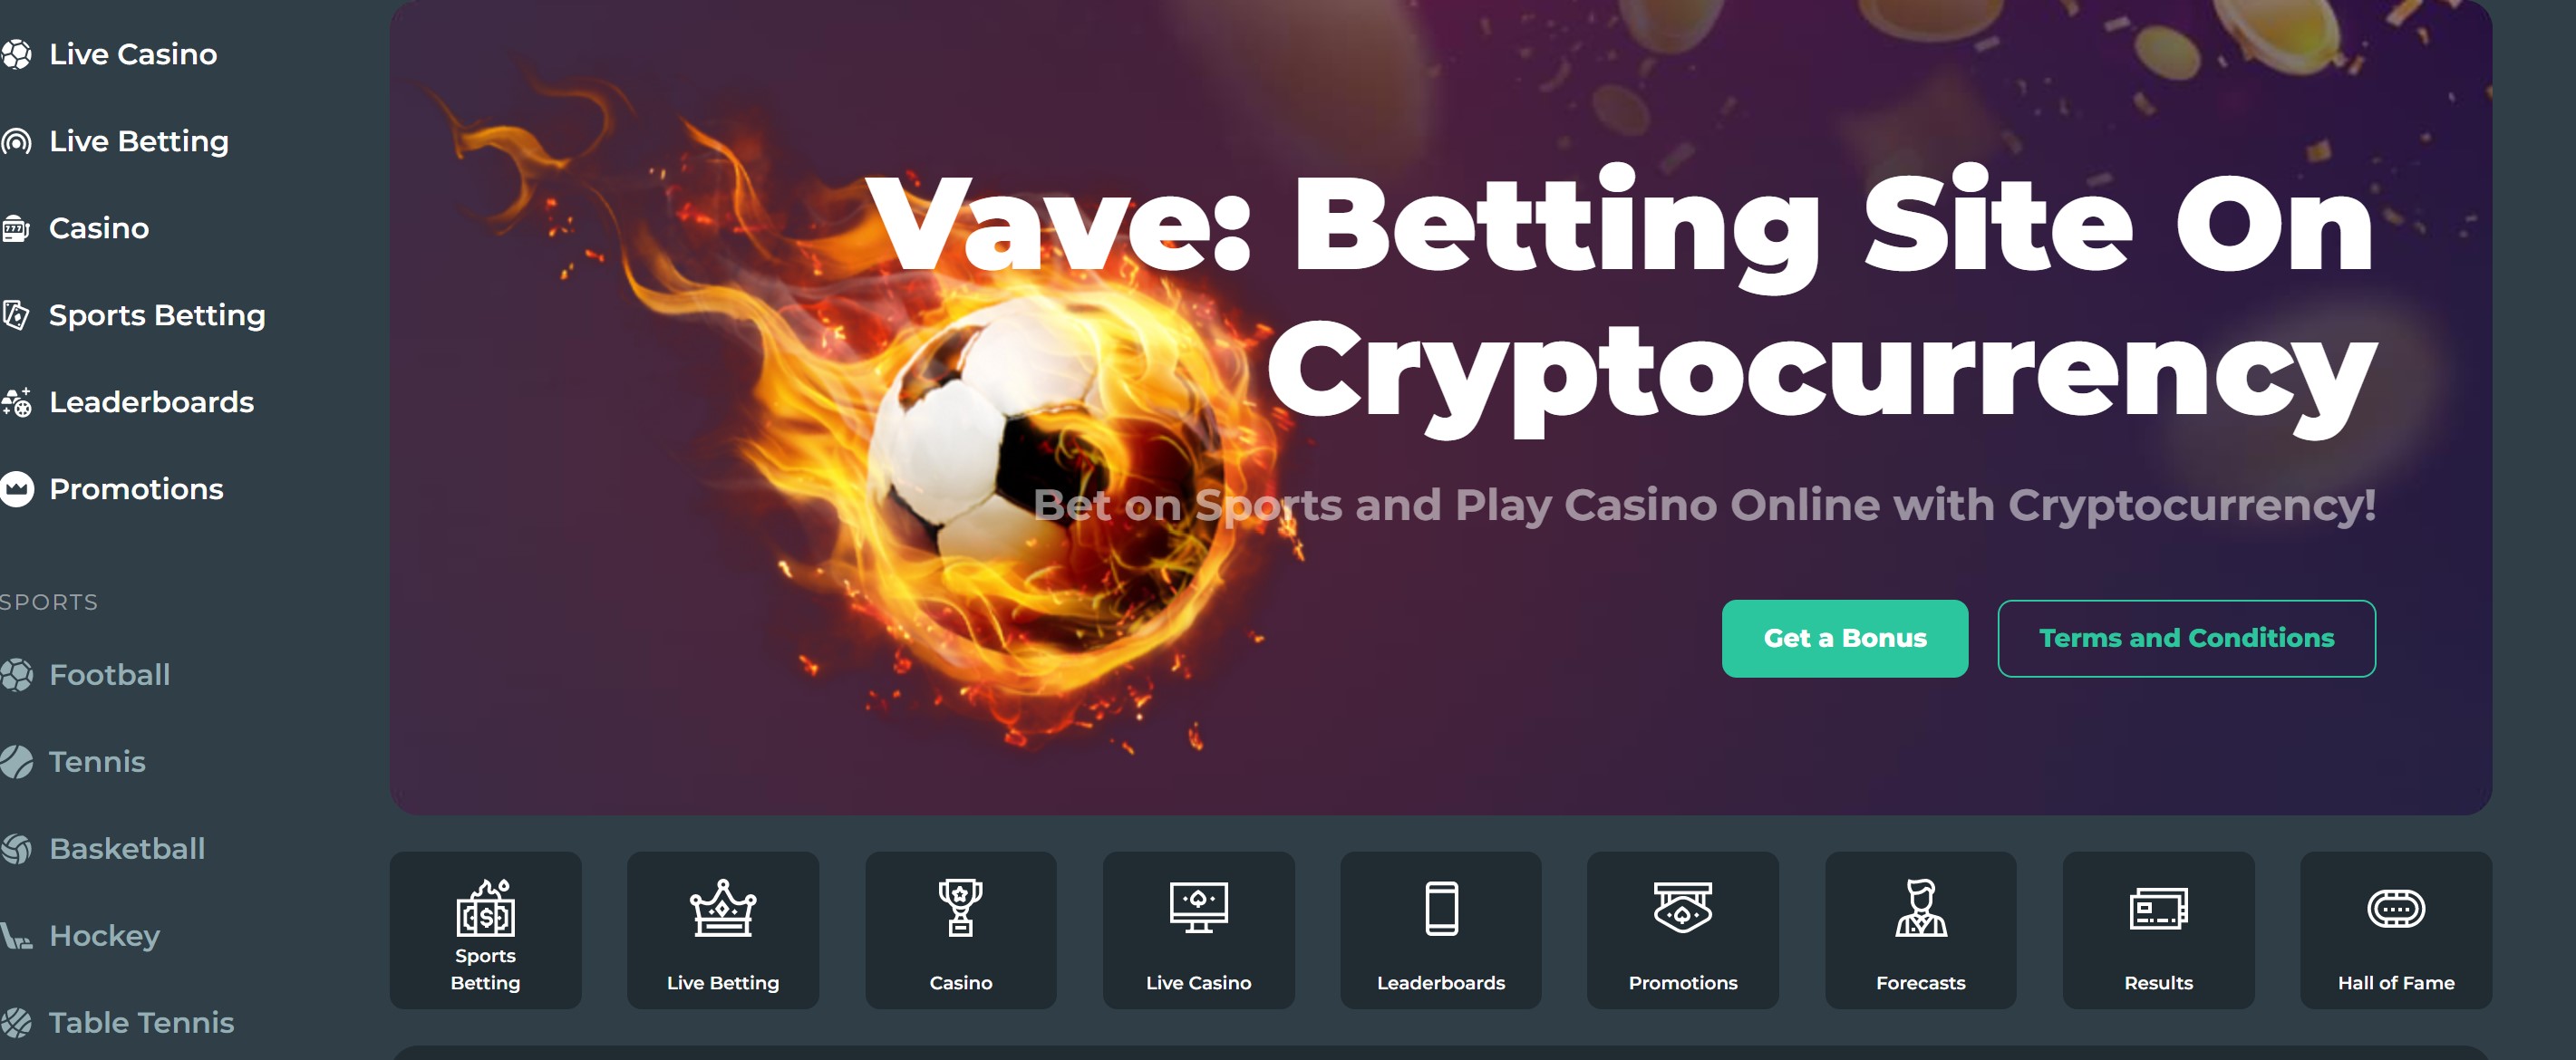 Vave crypto betting site and slots games